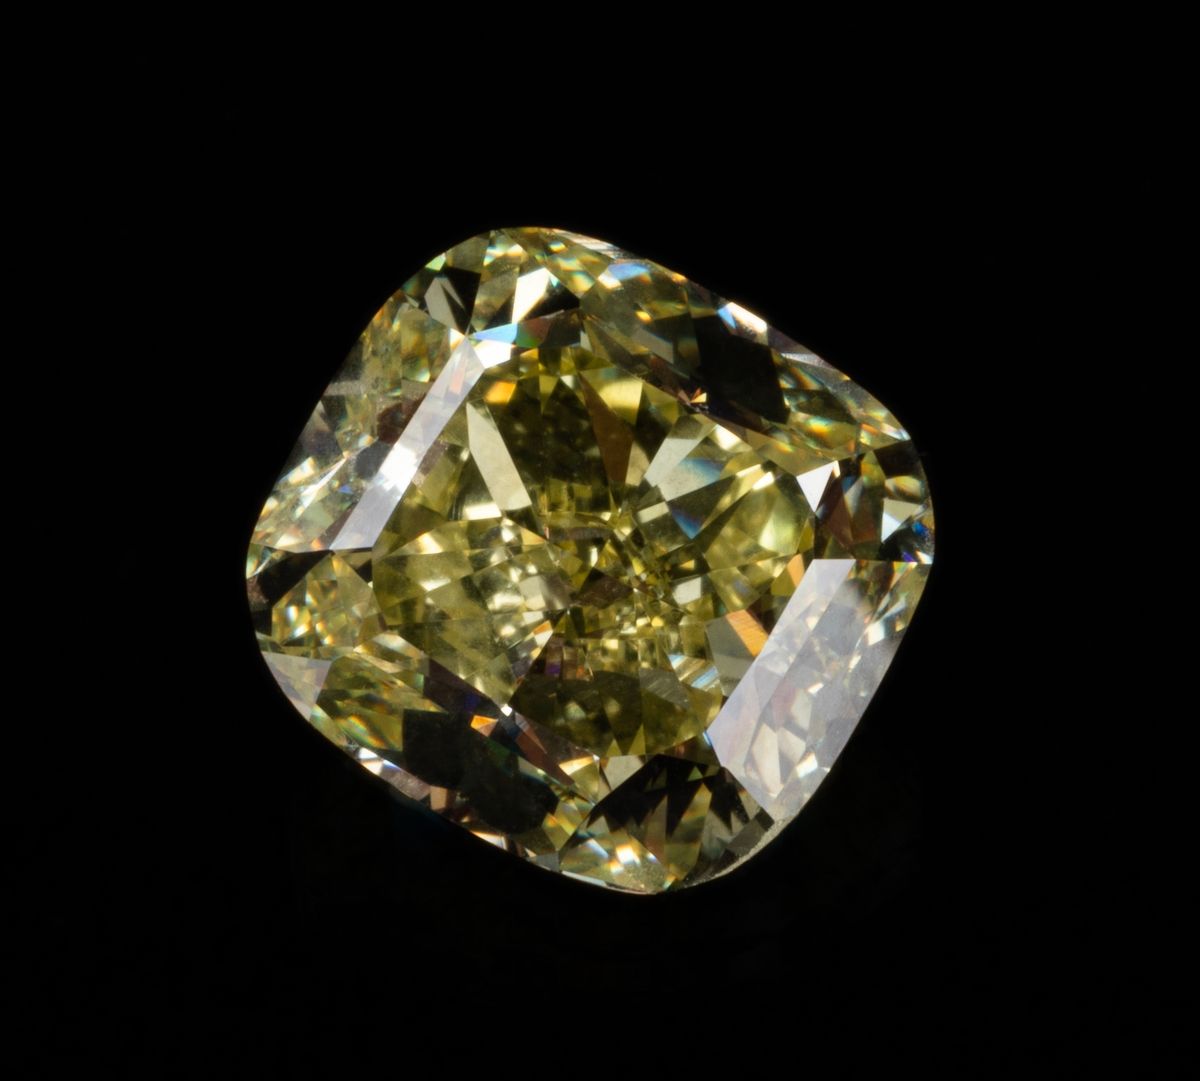 Null 5.61 ct. Fancy Intense Yellow diamond, brilliant modified cushion cut with &hellip;